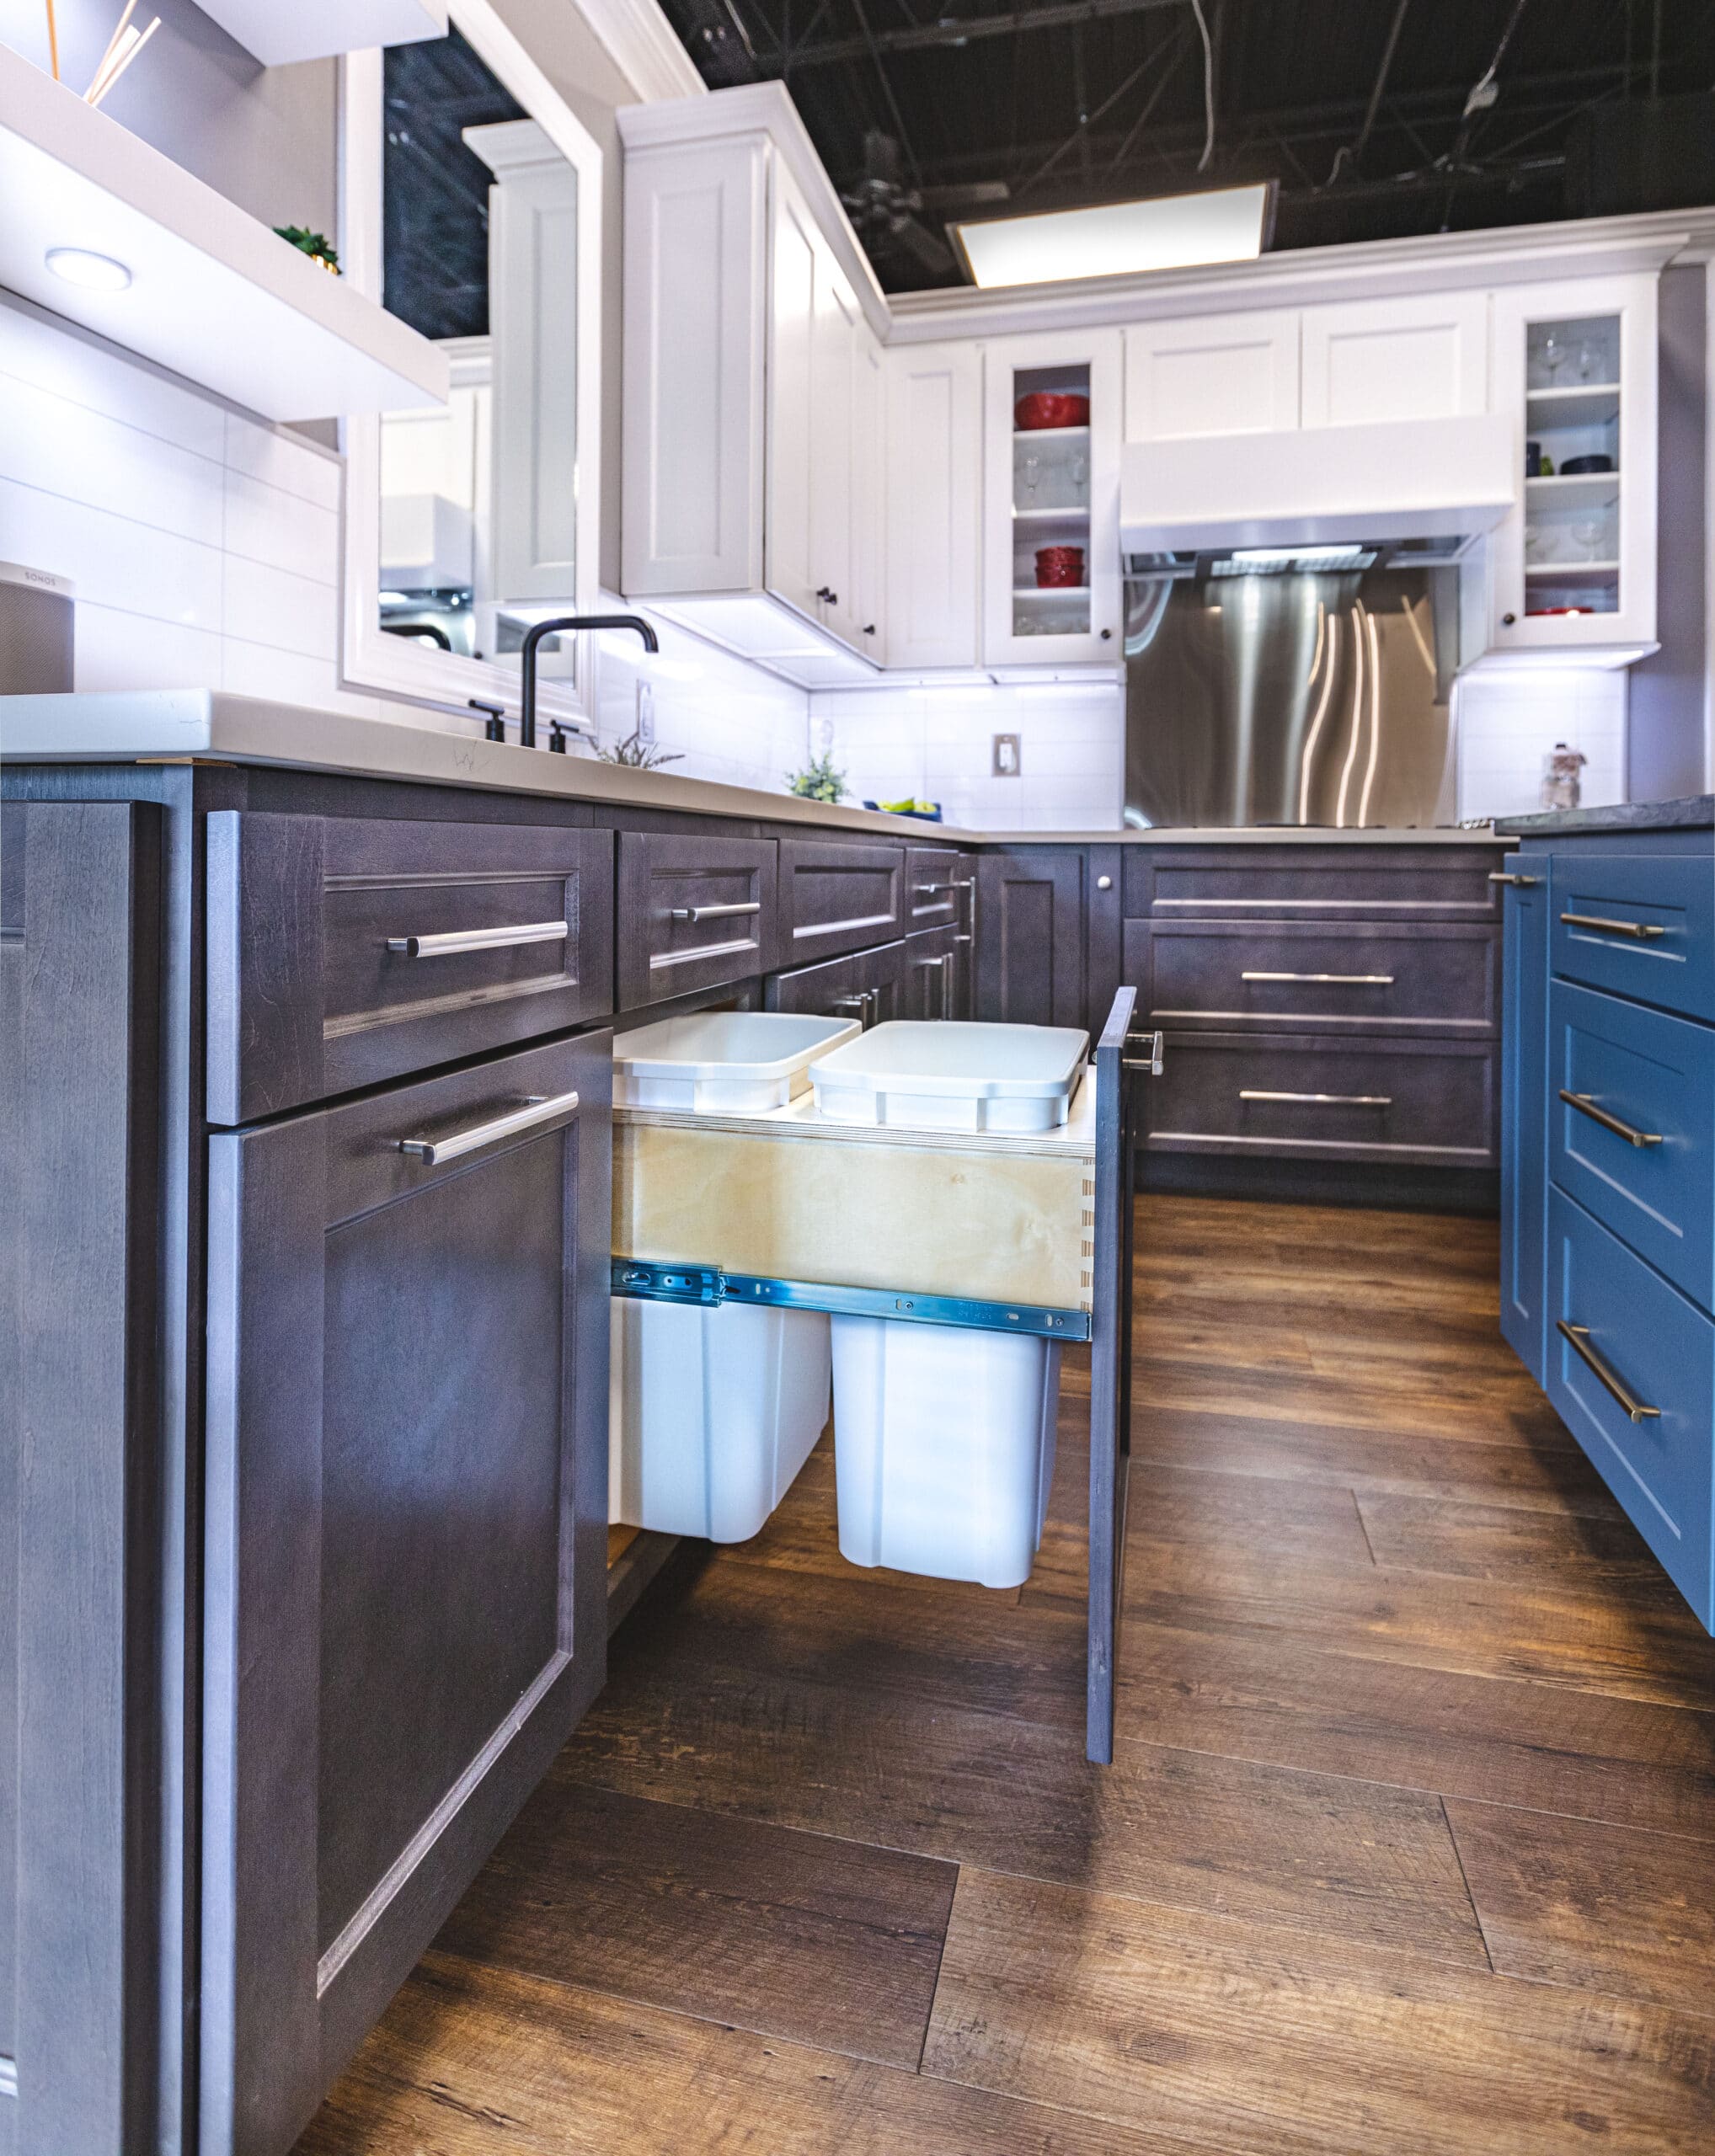 A kitchen with blue and brown cabinets and a trash can